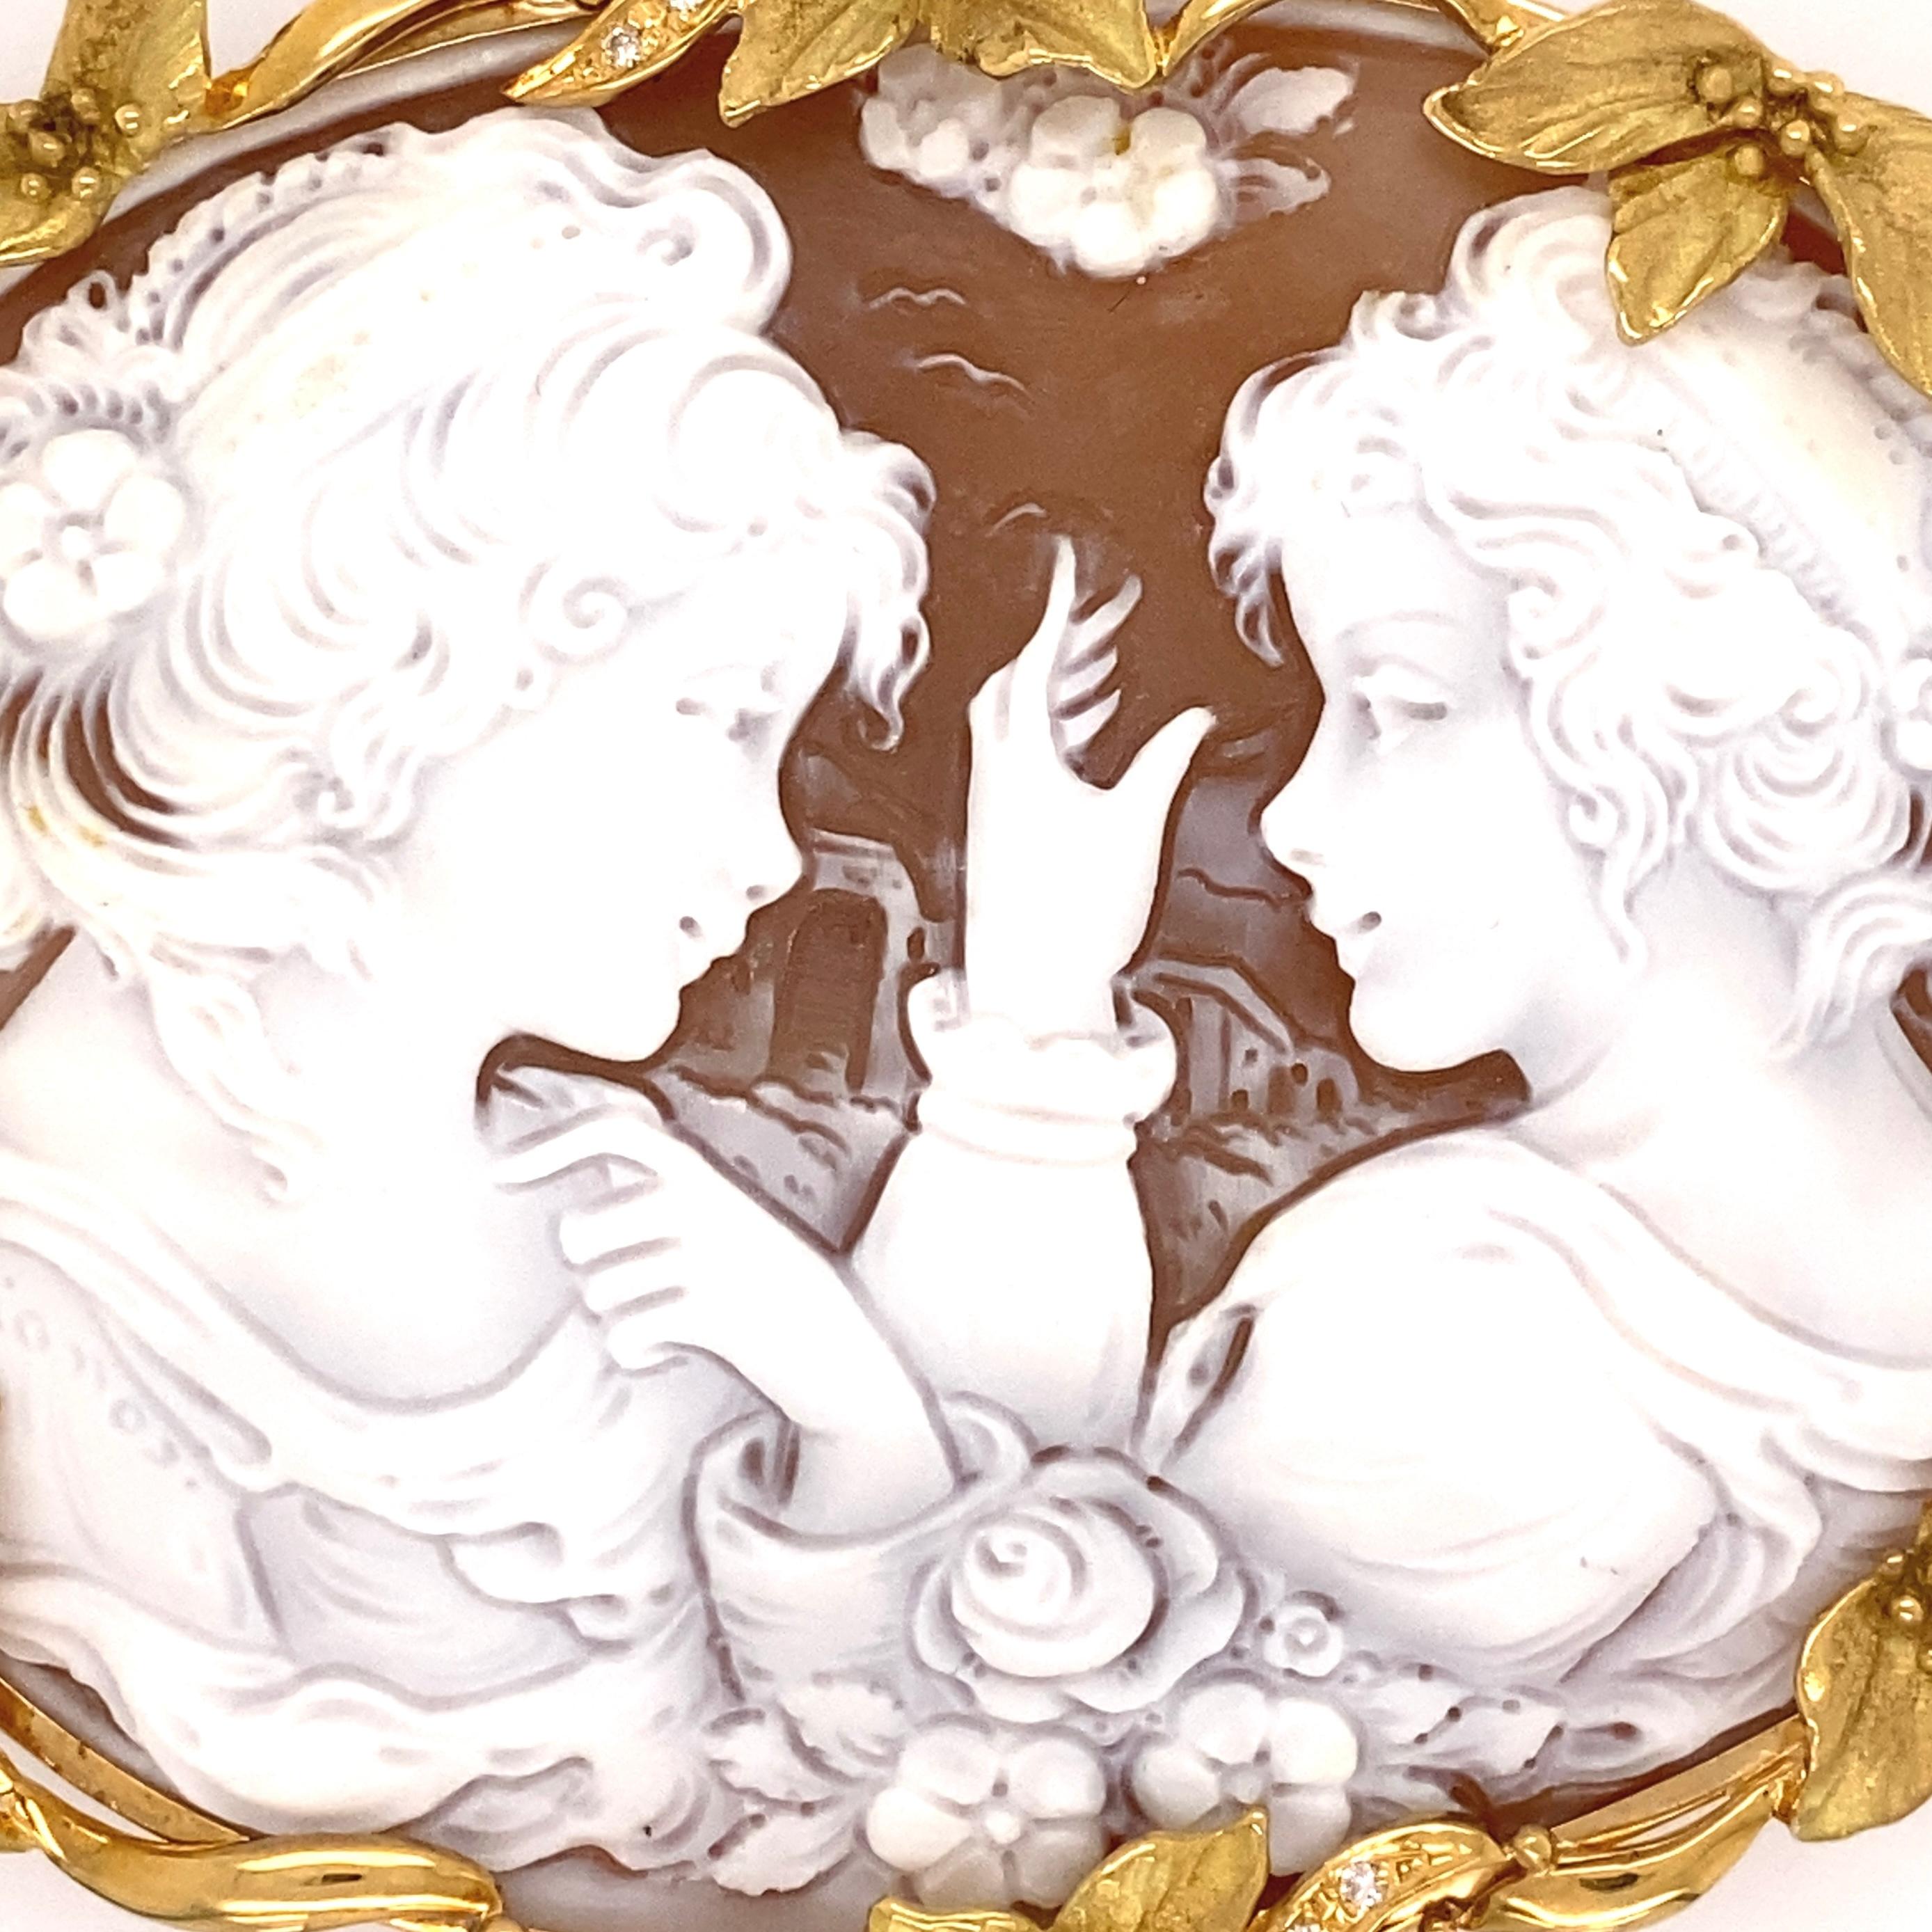 Beautiful Captivating Large Shell Cameo Brooch Pendant depicting 2 Beautiful Young Ladies, Hand Carved in High Relief. Rendered with remarkable detail and warmth, so unusual to find! Meticulously artisan engraved with exquisite detail, this natural